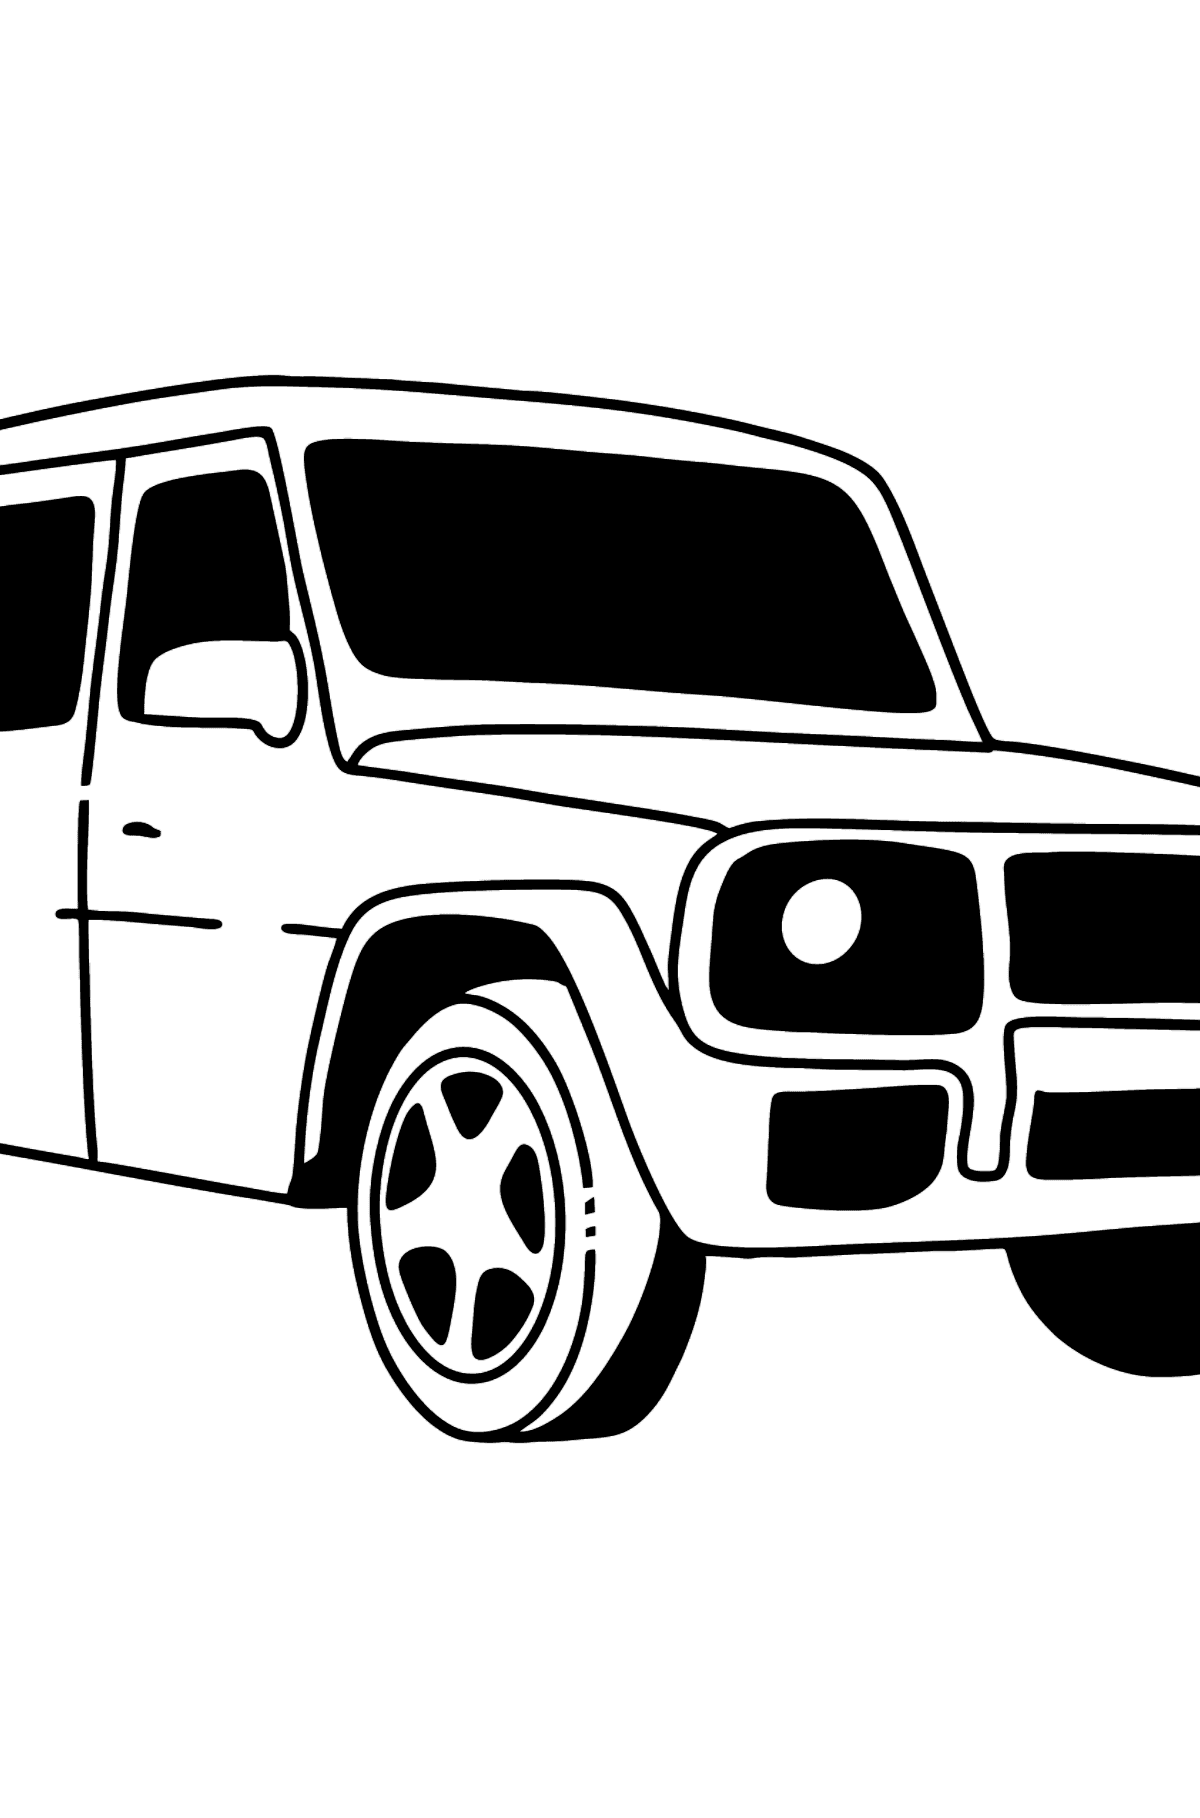 Mercedes-Benz G-Class SUV coloring page - Coloring Pages for Kids